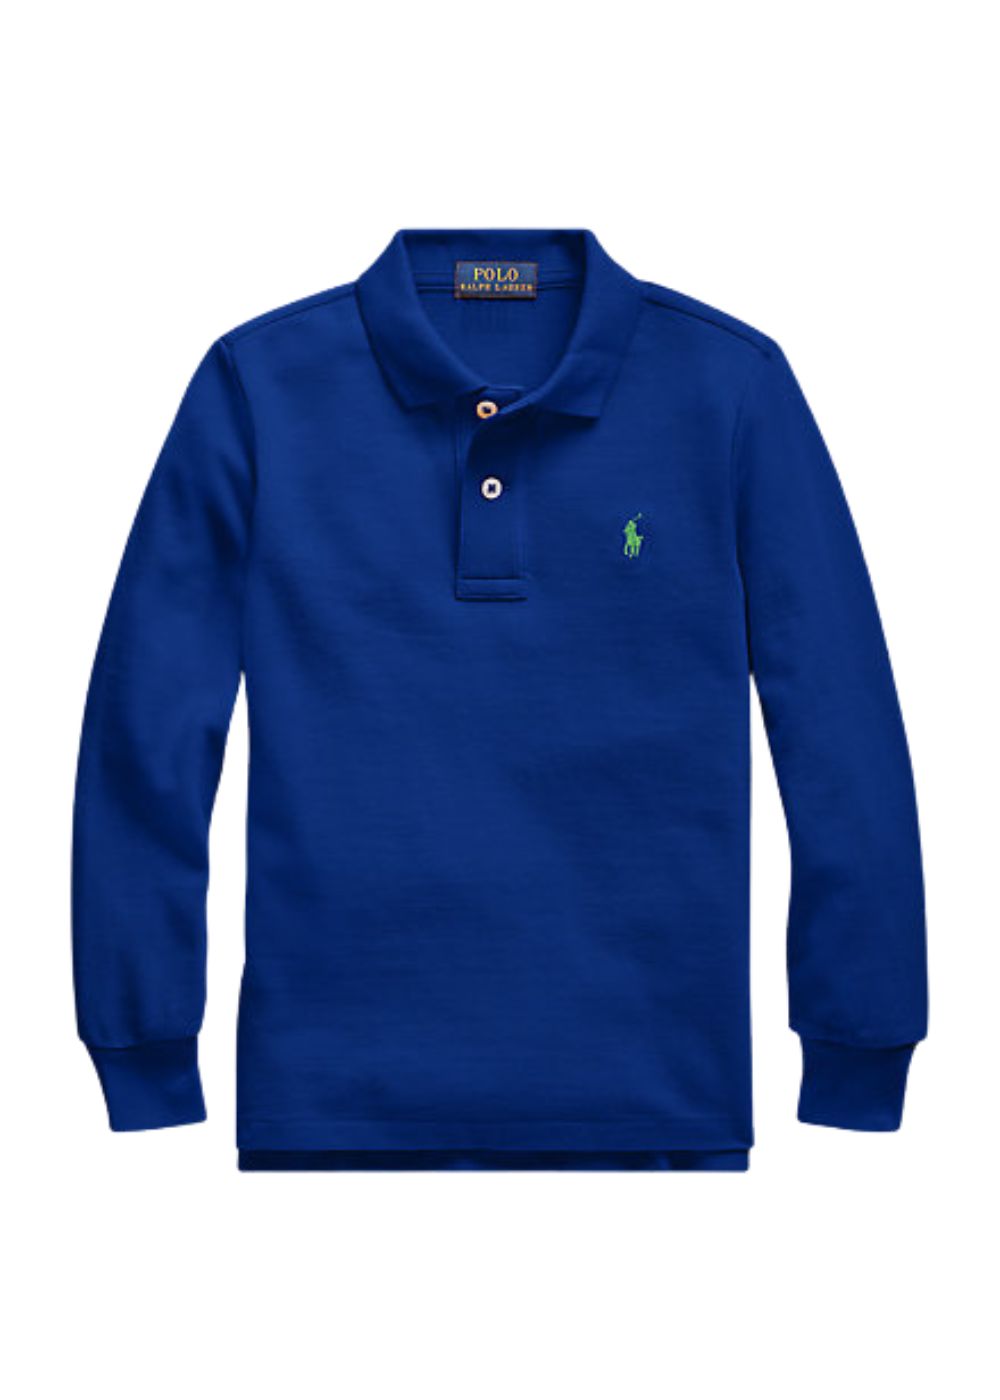 Featured image for “Polo Ralph Lauren Polo in piquè”